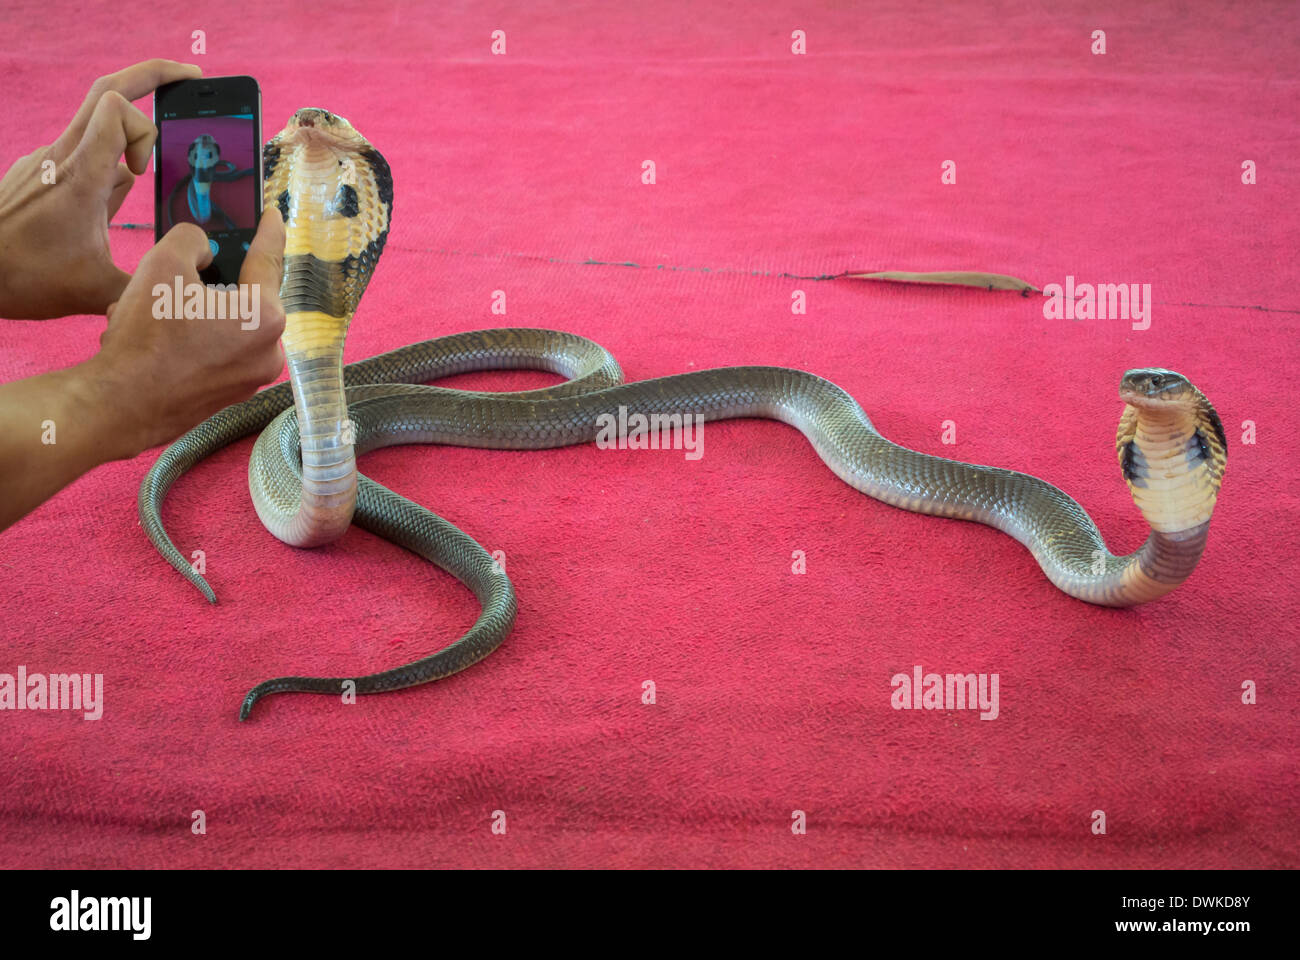 Snapping cobras with iphone Thailand Stock Photo